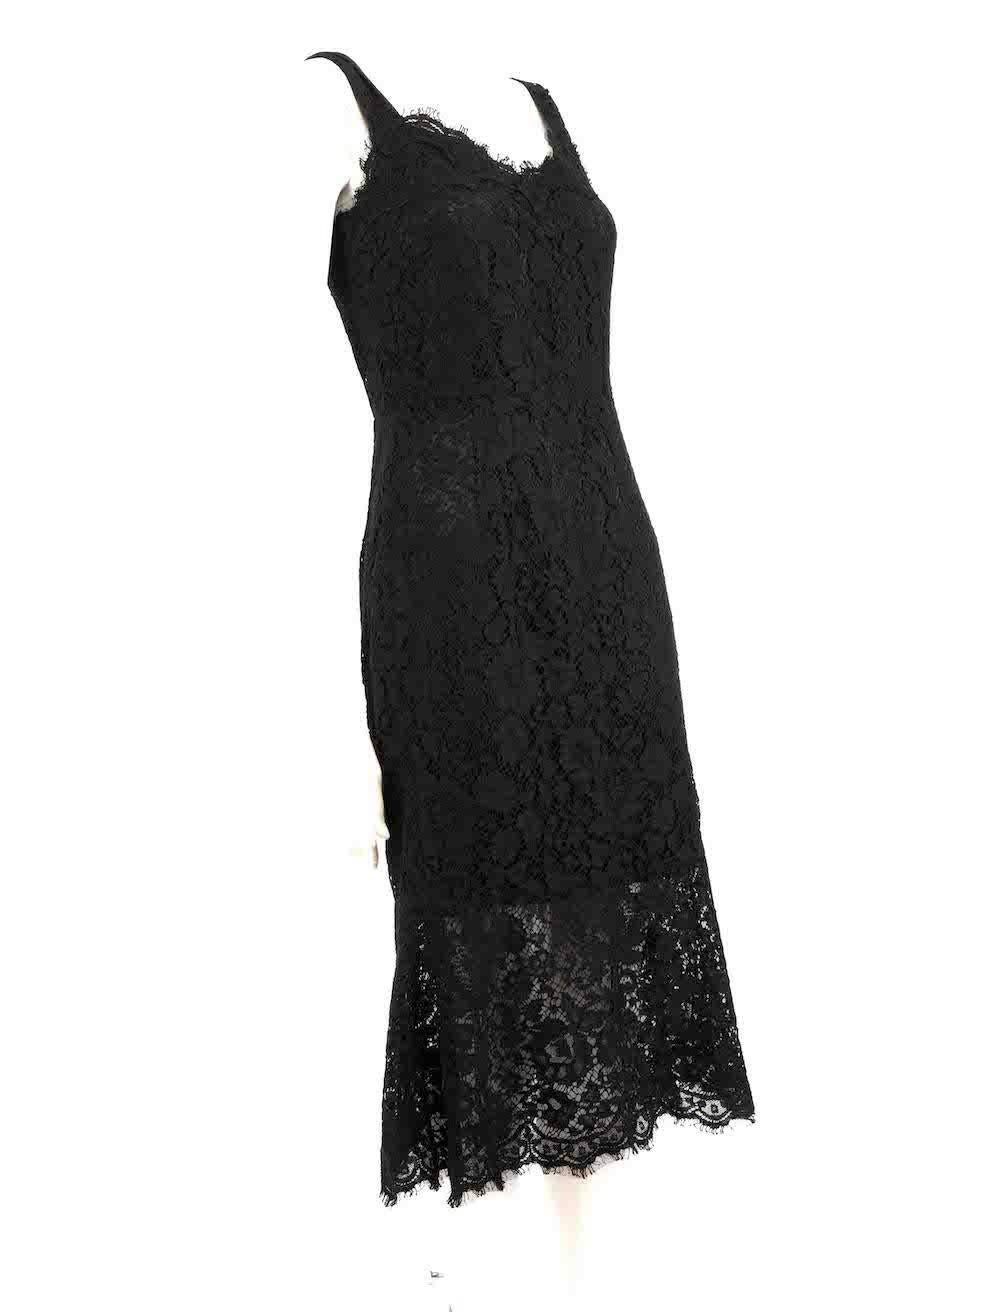 CONDITION is Very good. Minimal wear to dress is evident. Minimal wear to the front with holes to the lace and the trims with light fraying on this used Dolce & Gabbana designer resale item.
 
 Details
 Black
 Lace
 Dress
 Midi
 V-neck
 Sleeveless
